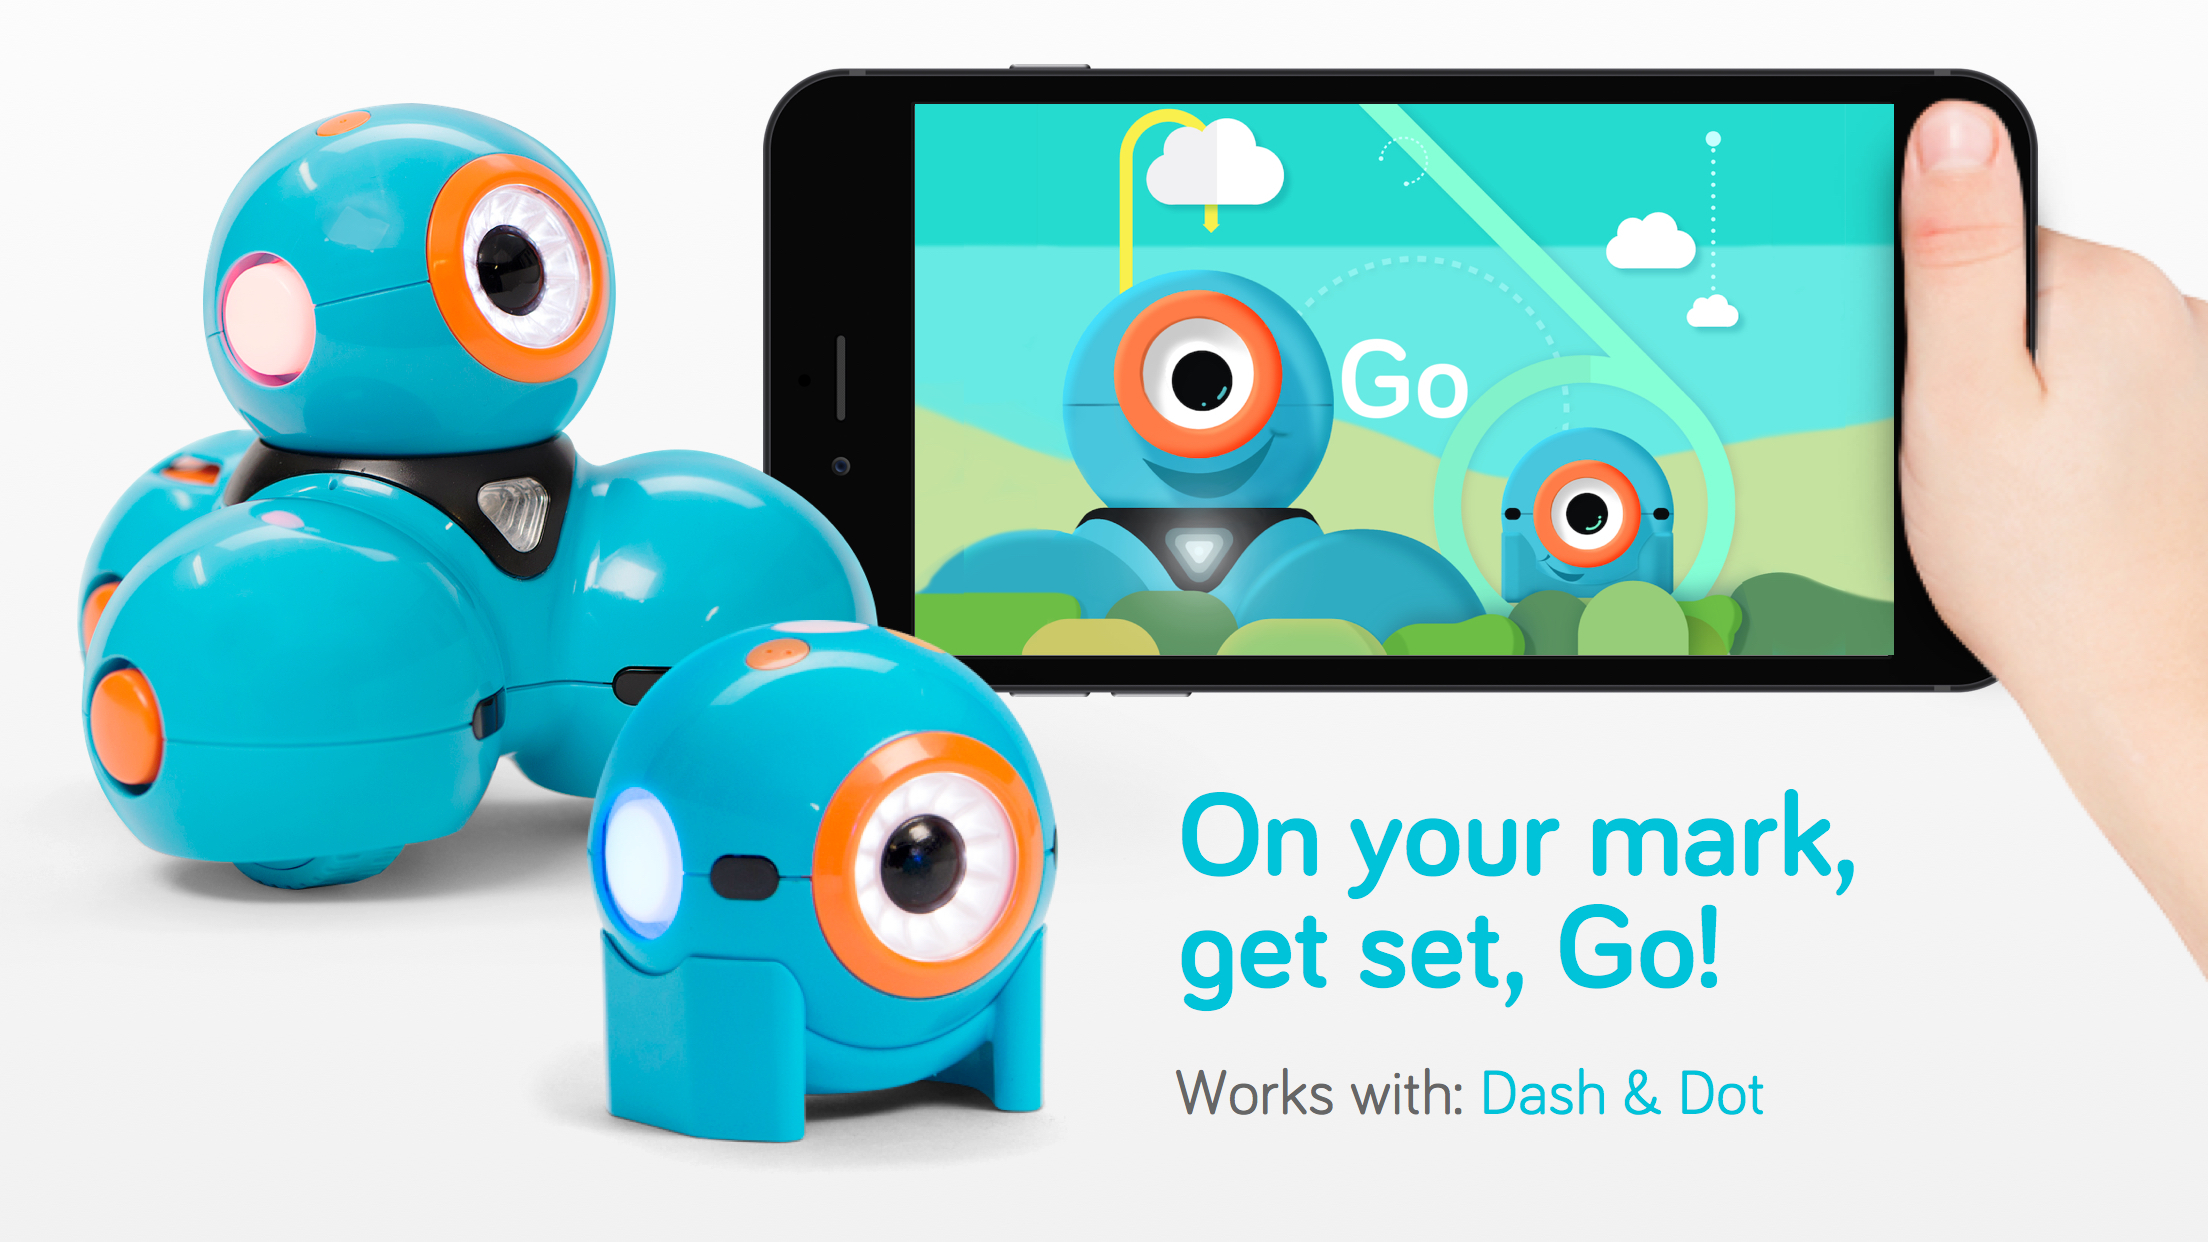 Go for Dash & Dot robots - for iPhone